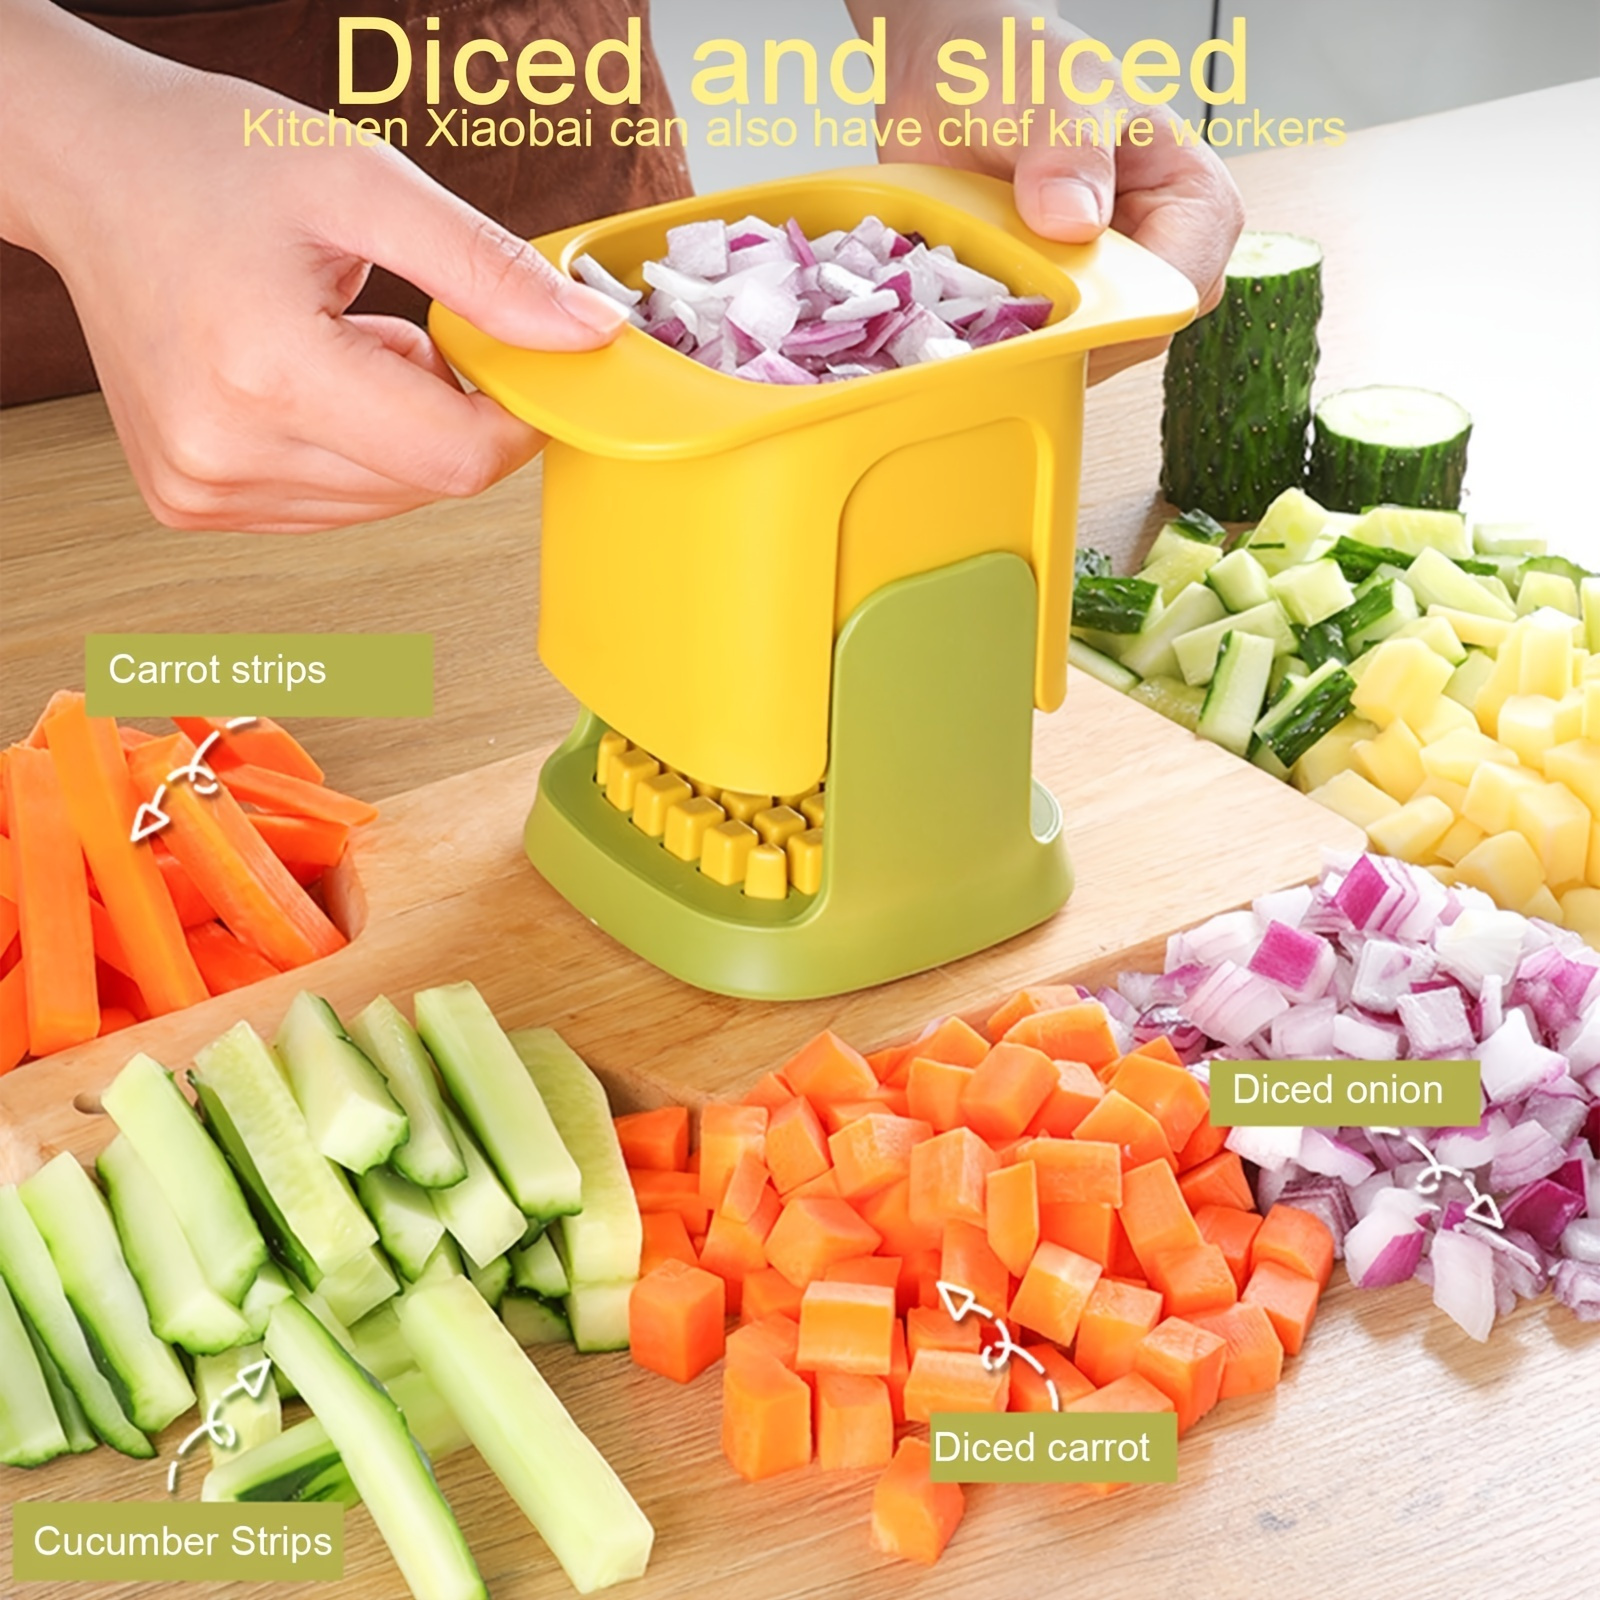 Stainless Steel Crinkle Cut Tool, All-in-One Multifunctional Wavy Chopper Tool Assistant, Suitable for Vegetable Fruit Safe Potato Slicer Cutter